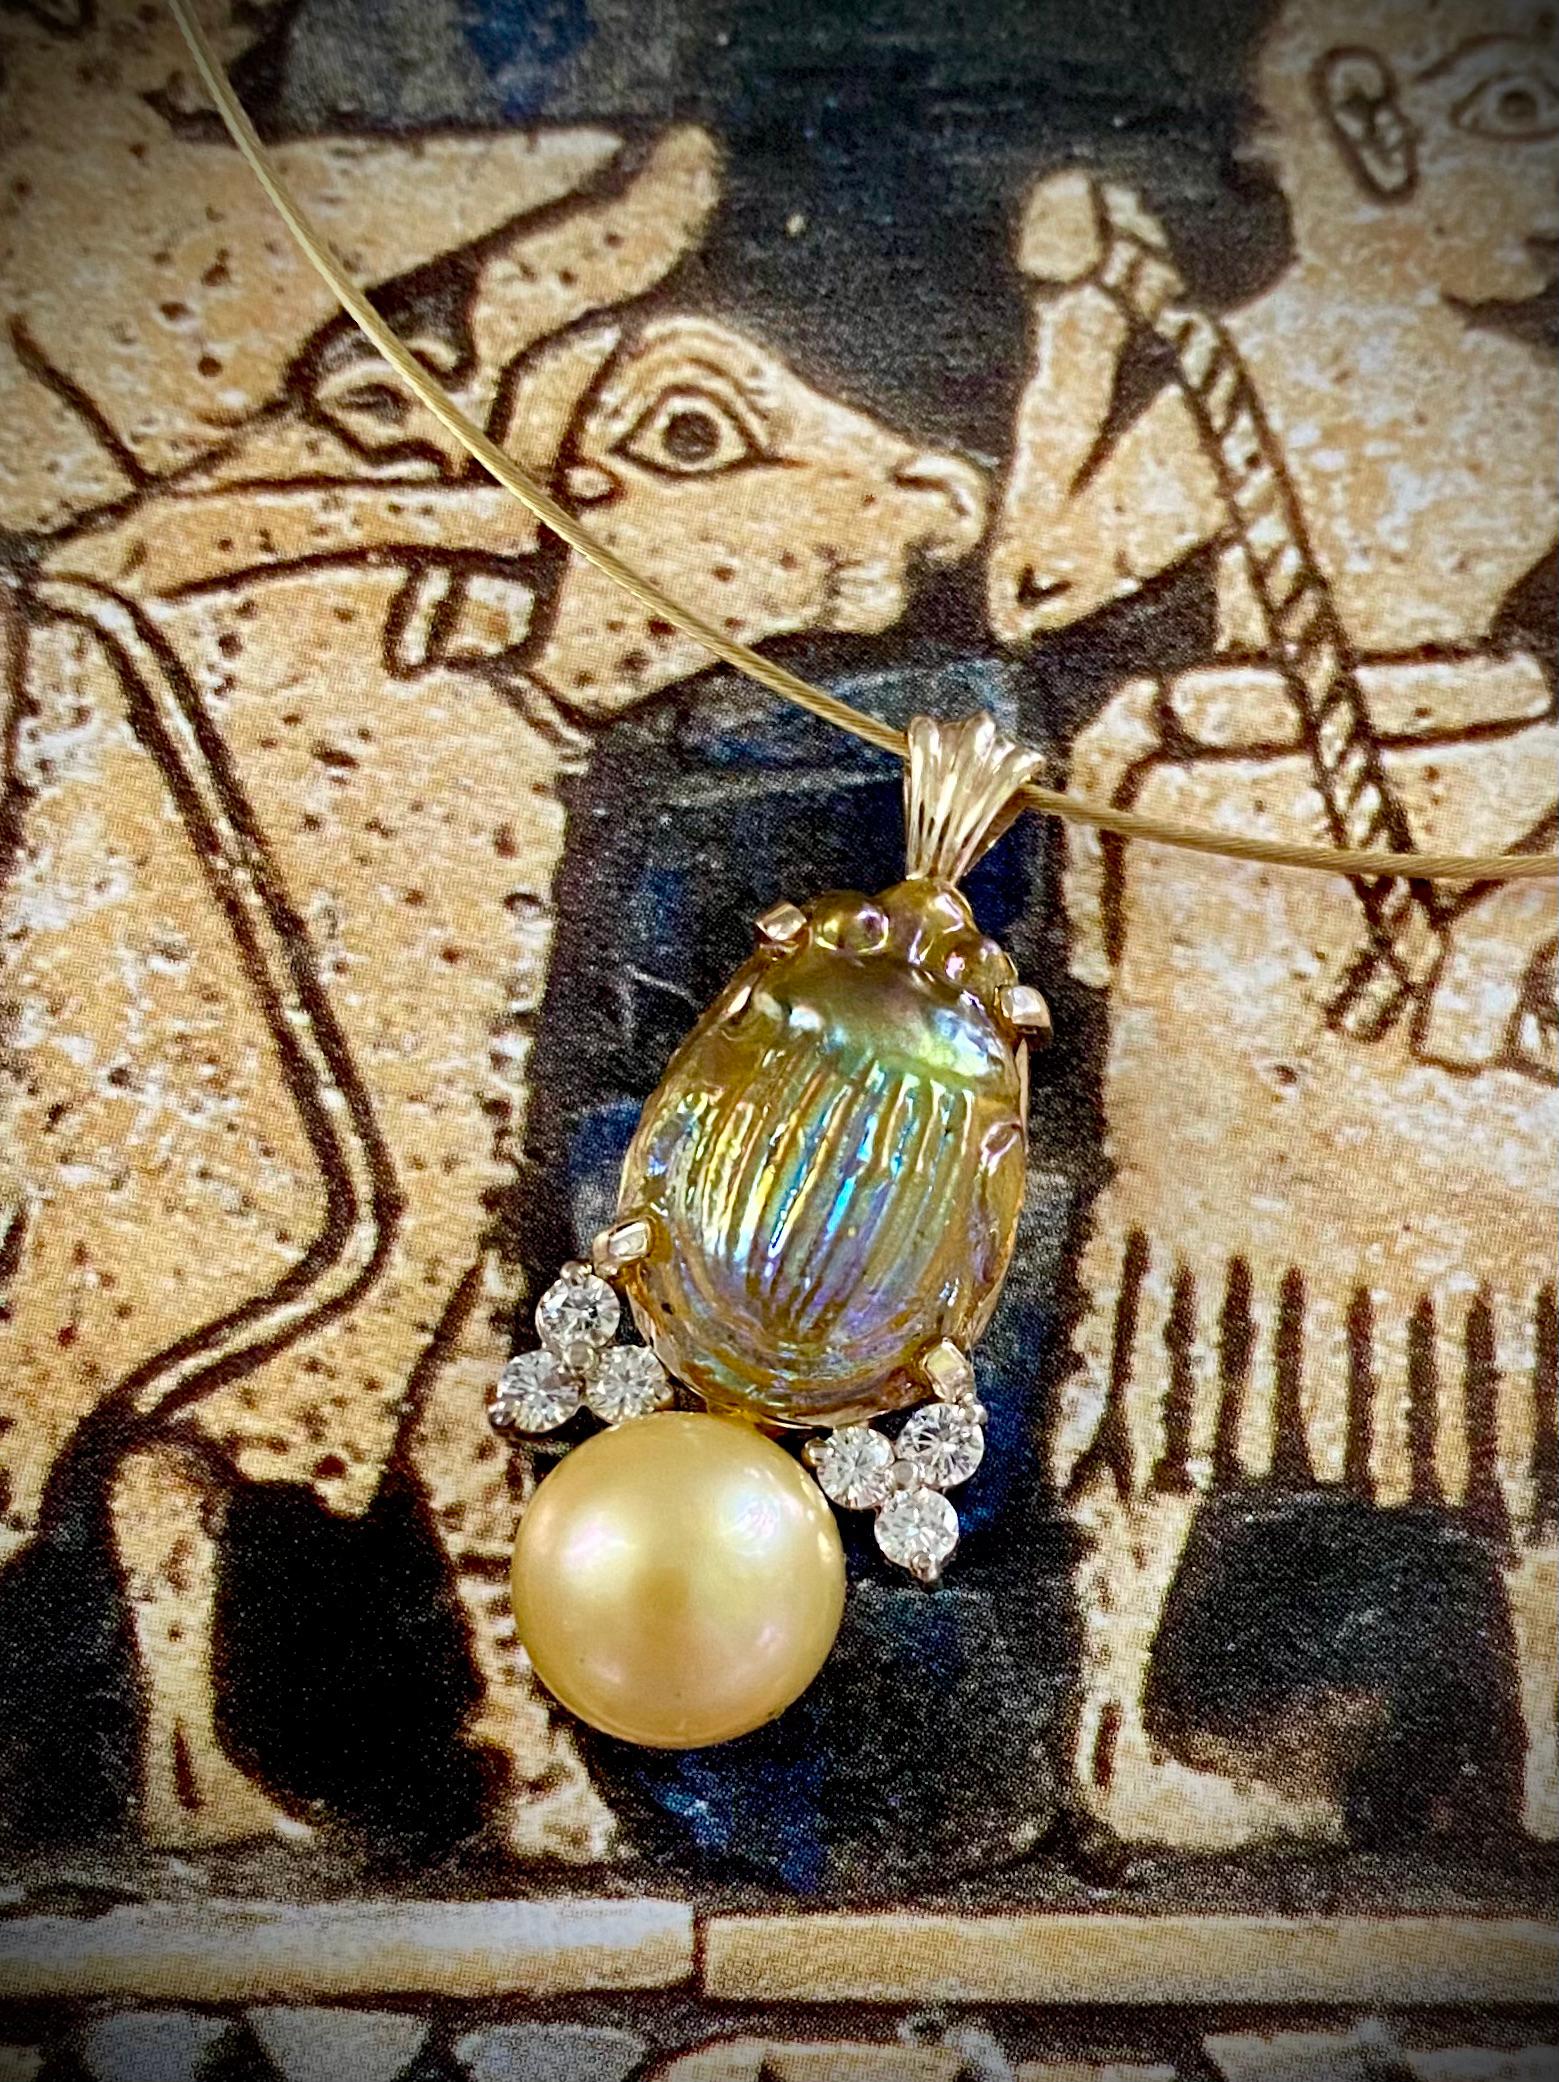 An antique Louis Comfort Tiffany opalized glass scarab is featured in this distinguished drop pendant.  The beautifully detailed scarab possesses a fantastic opal-like play of light reflecting colors of blue, green and lavender all on the golden